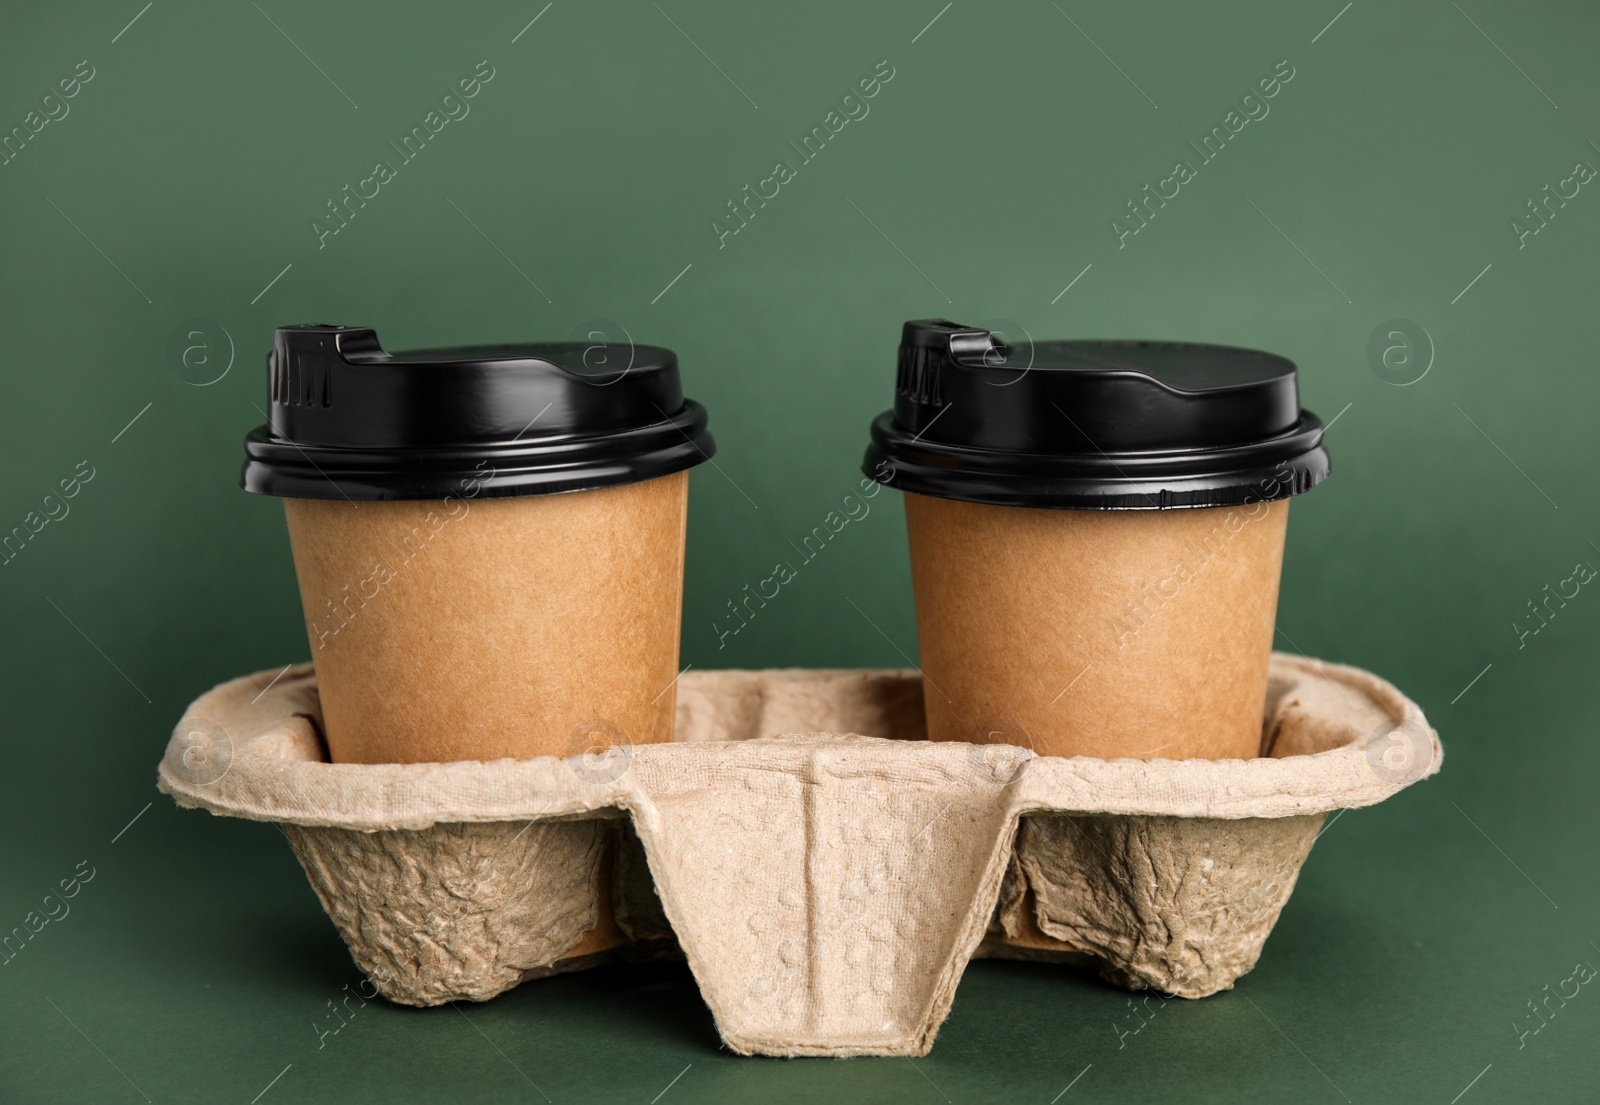 Photo of Takeaway paper coffee cups with plastic lids in cardboard holder on dark green background